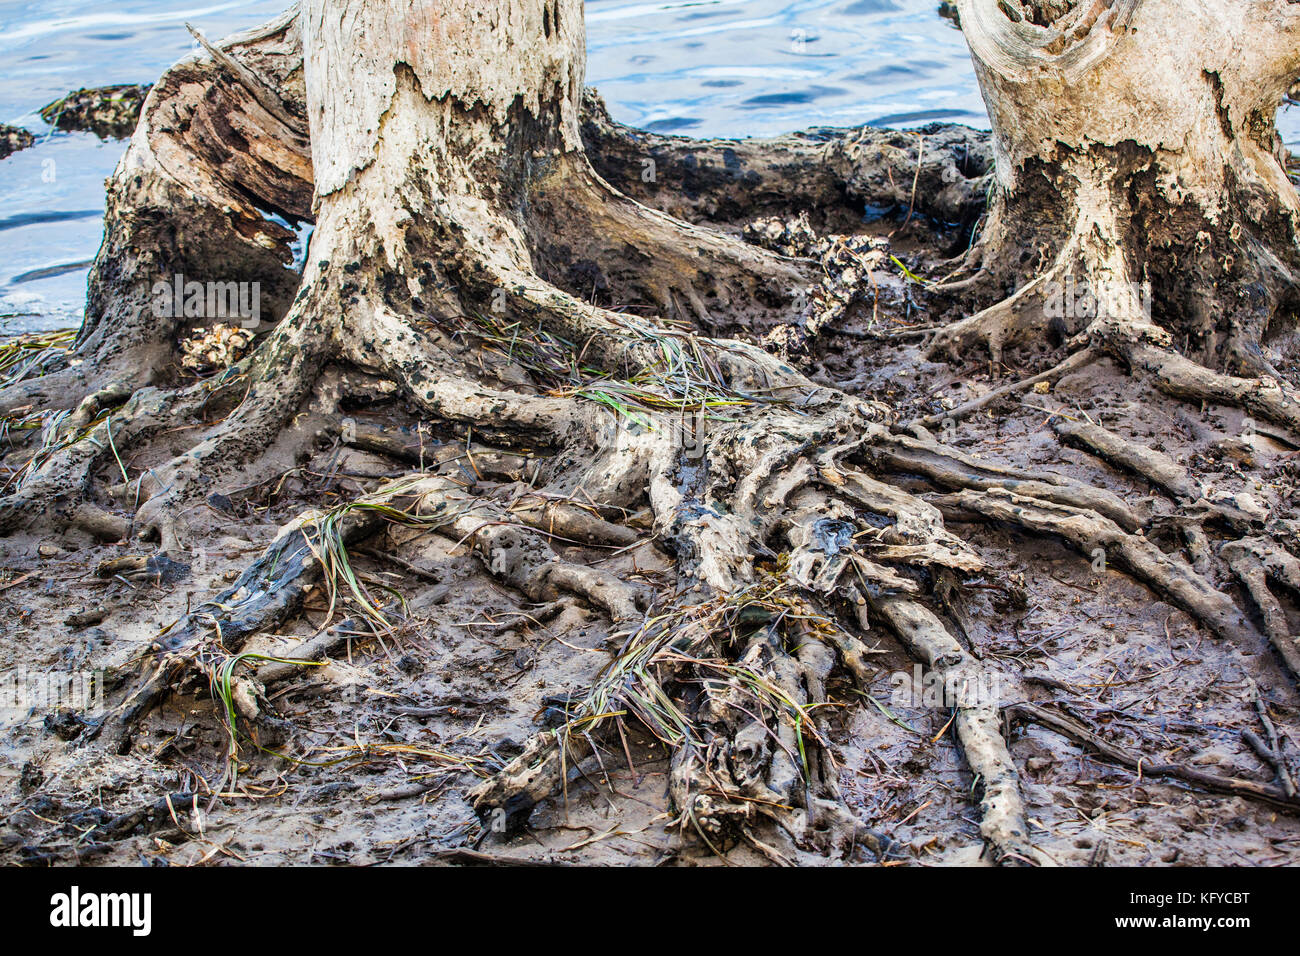 Australia, New South Wales, Central Coast, Woy Woy, dead mangrove trees at the shores of Brisbane Water Stock Photo